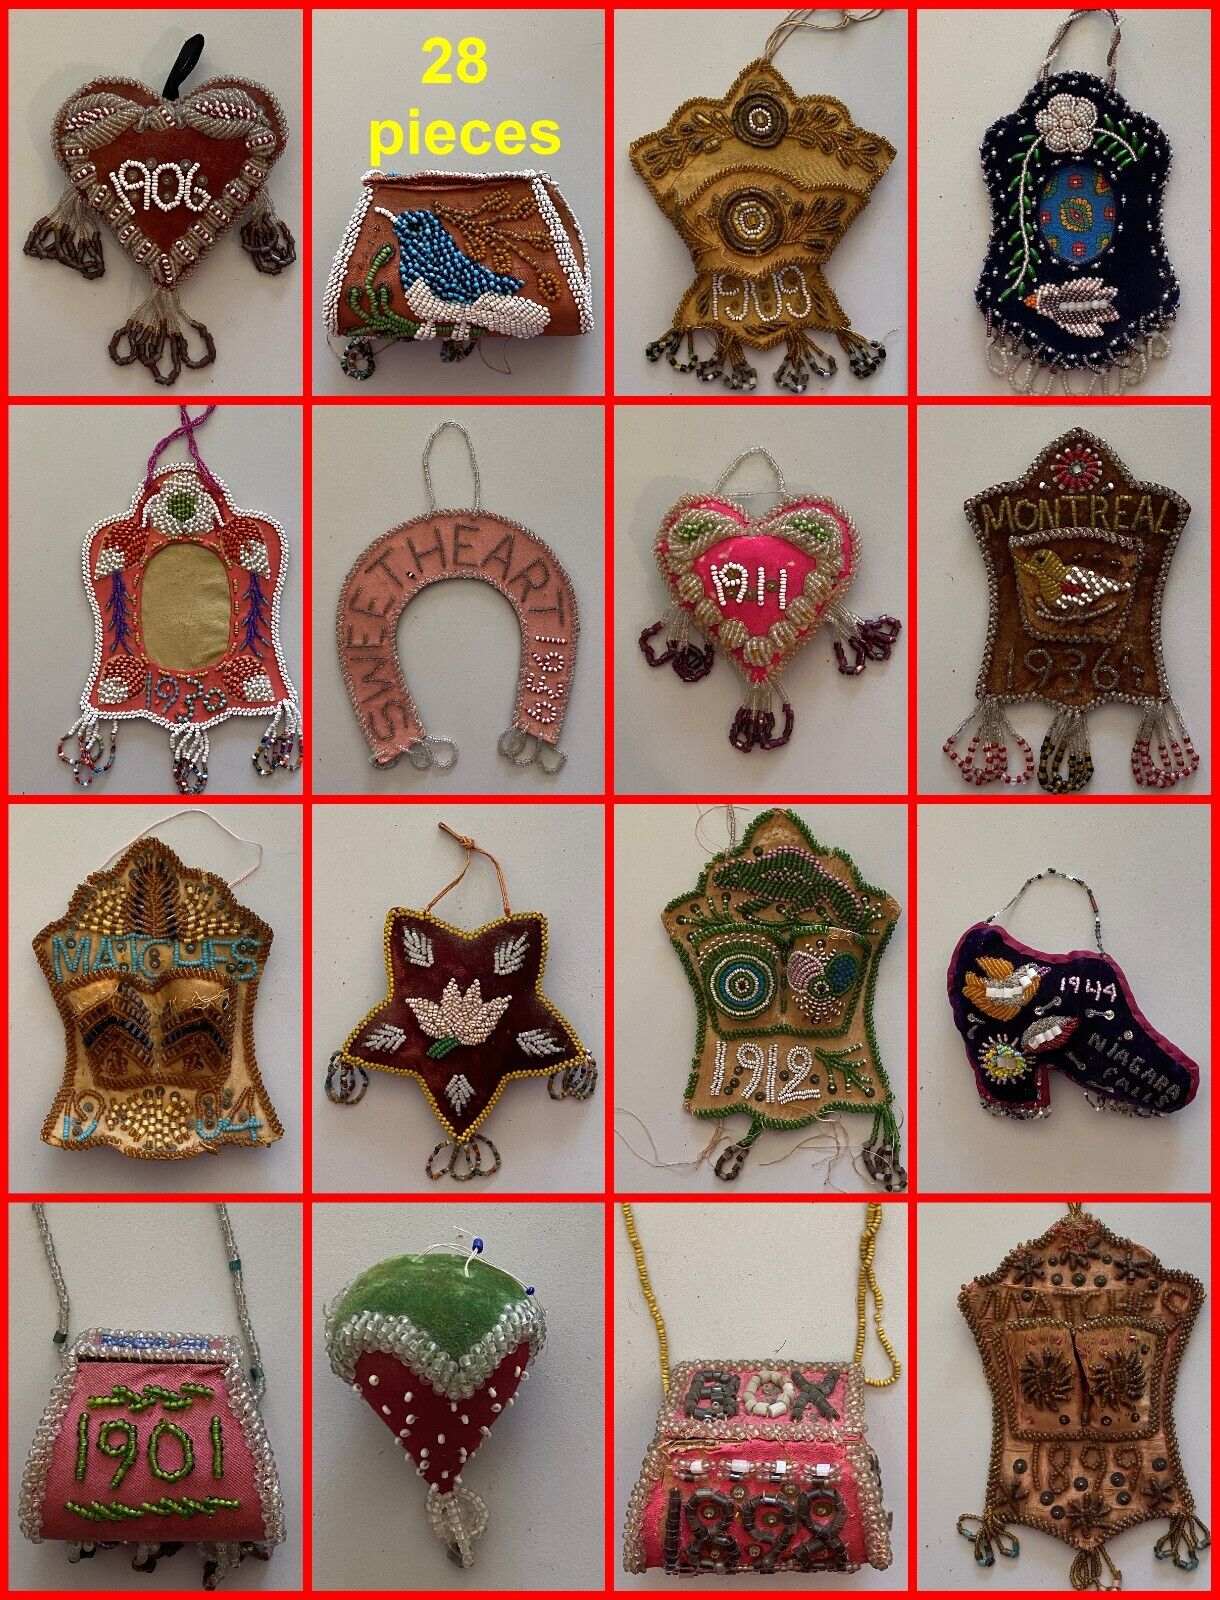 Iroquois / Mohawk Whimsy Collection  - Native American Beadwork - 28 Pieces